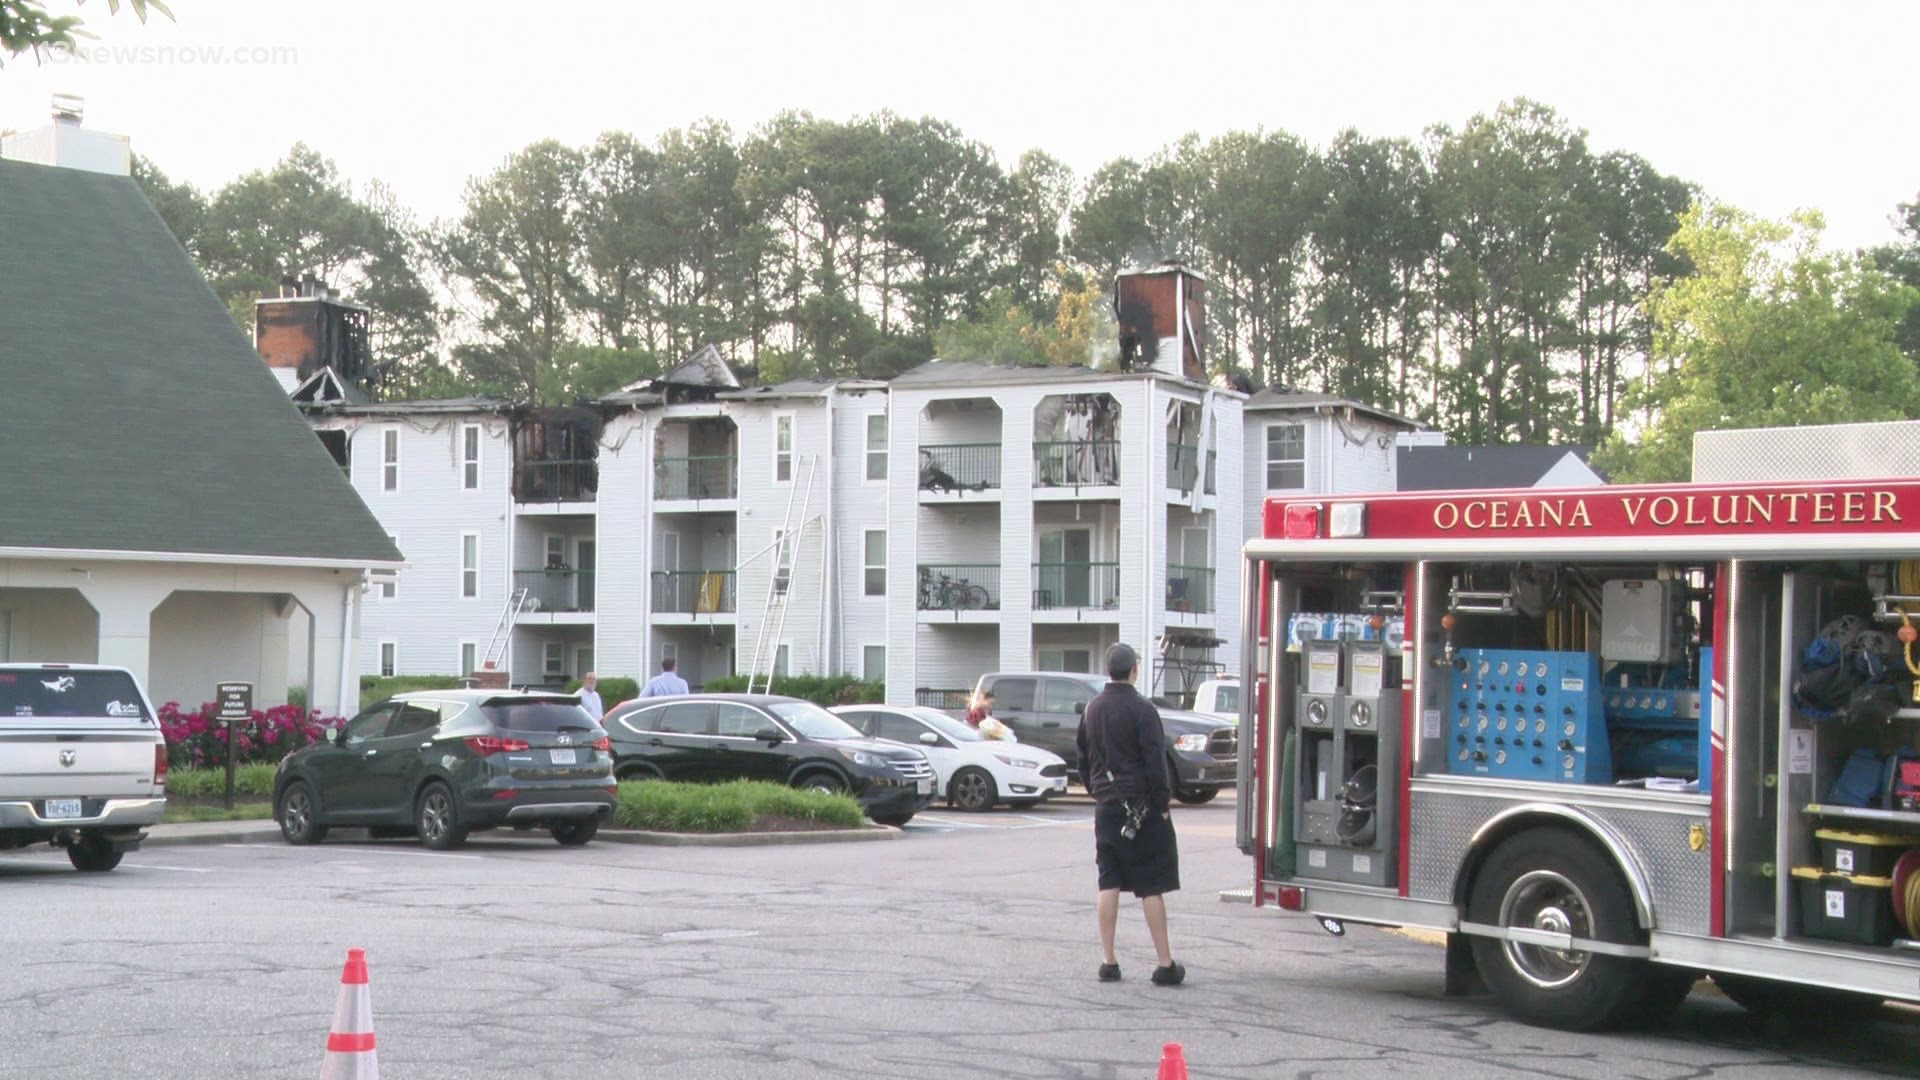 13News Now Anne Sparaco has the latest on the investigation into a large fire at an apartment complex on Hunters Chase Drive in Virginia Beach.